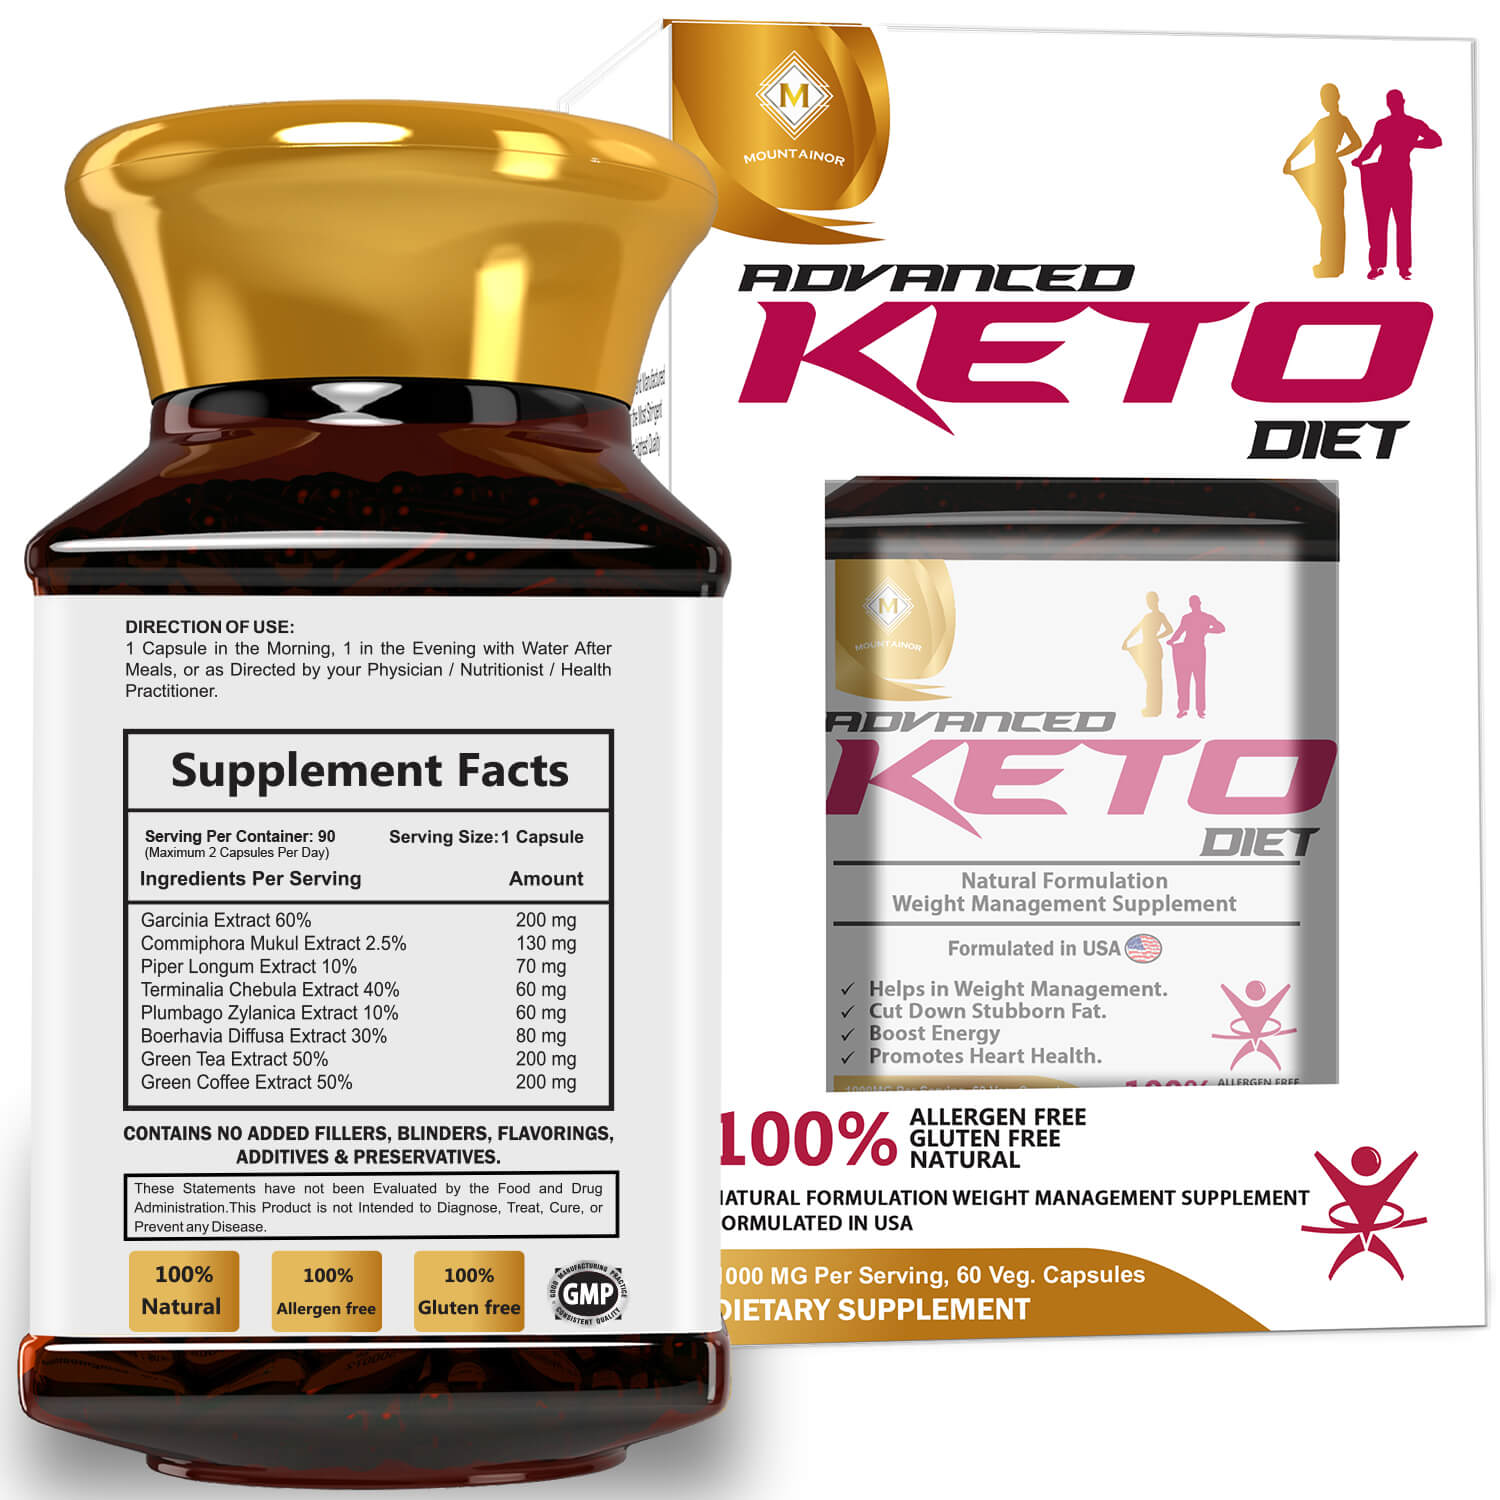 Keto Diet Supplement with Garcinia Cambogia for Weight Management - 60 Veg Capsules - Mountainor